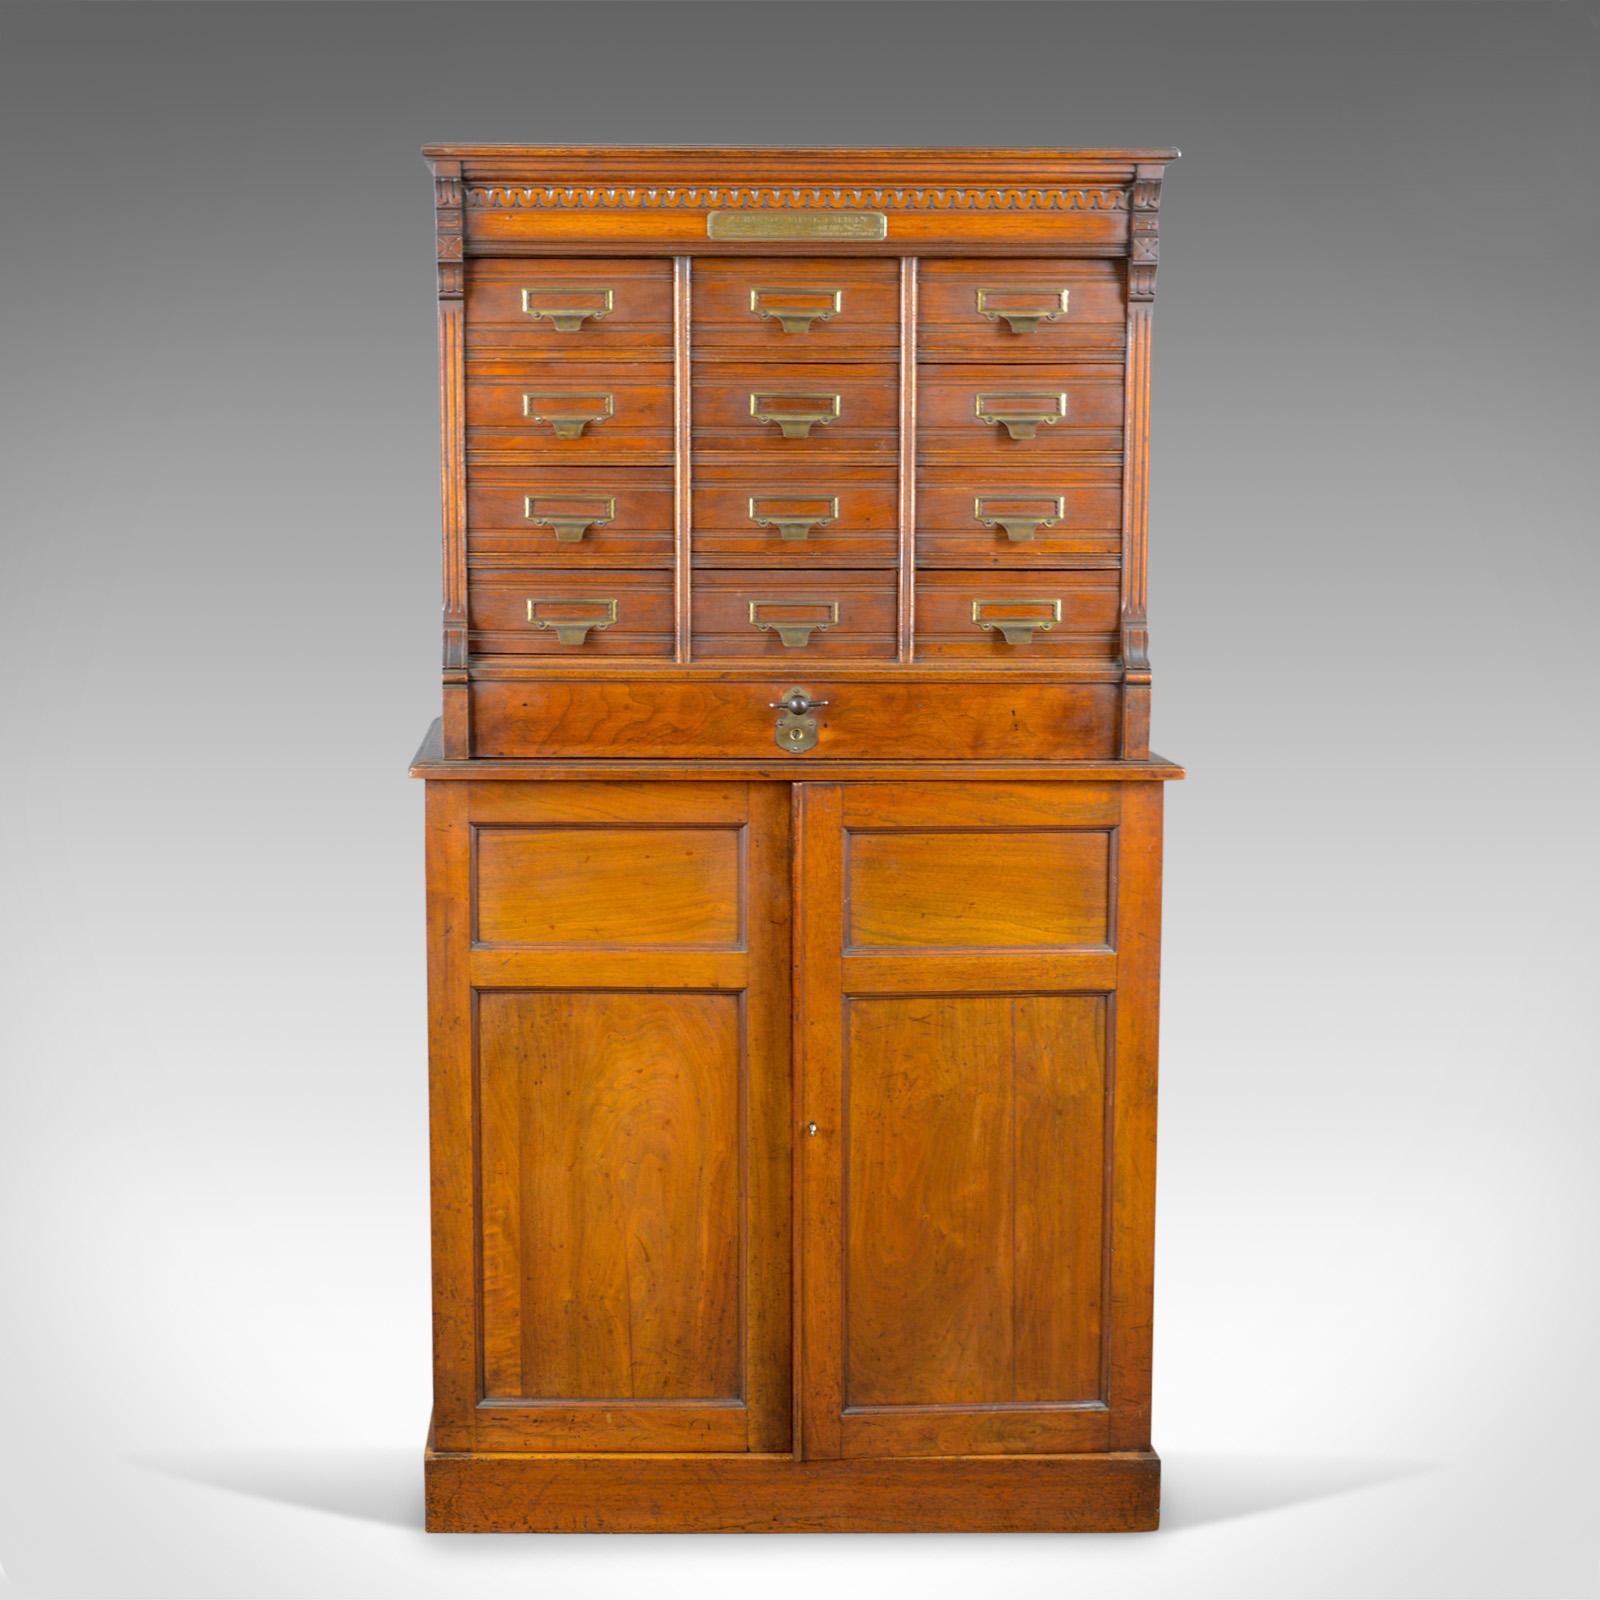 This is a large antique filing cabinet, an English, Edwardian walnut cupboard by renowned cabinet makers Shannon File Co., London and dating to the early 19th century, circa 1910.

Magnificent antique filing cabinet
English walnut displaying good